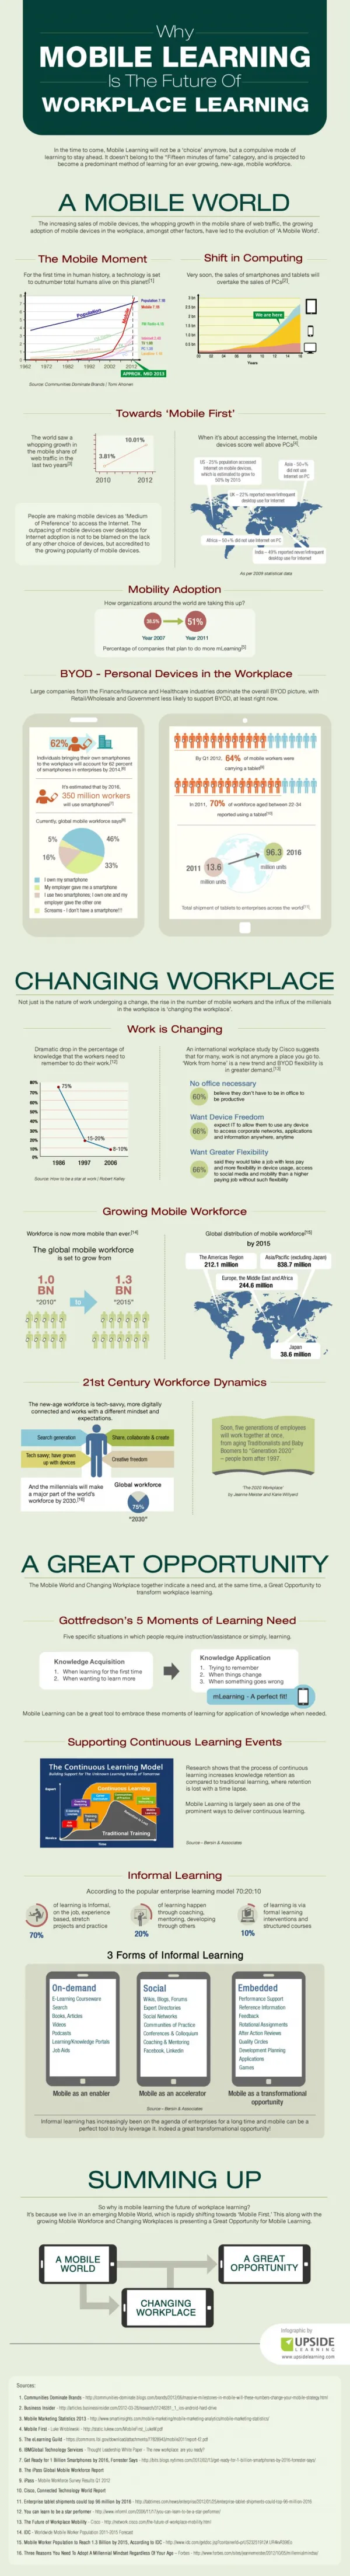 Why Mobile Learning Is The Future Of Workplace Learning (Infographic)